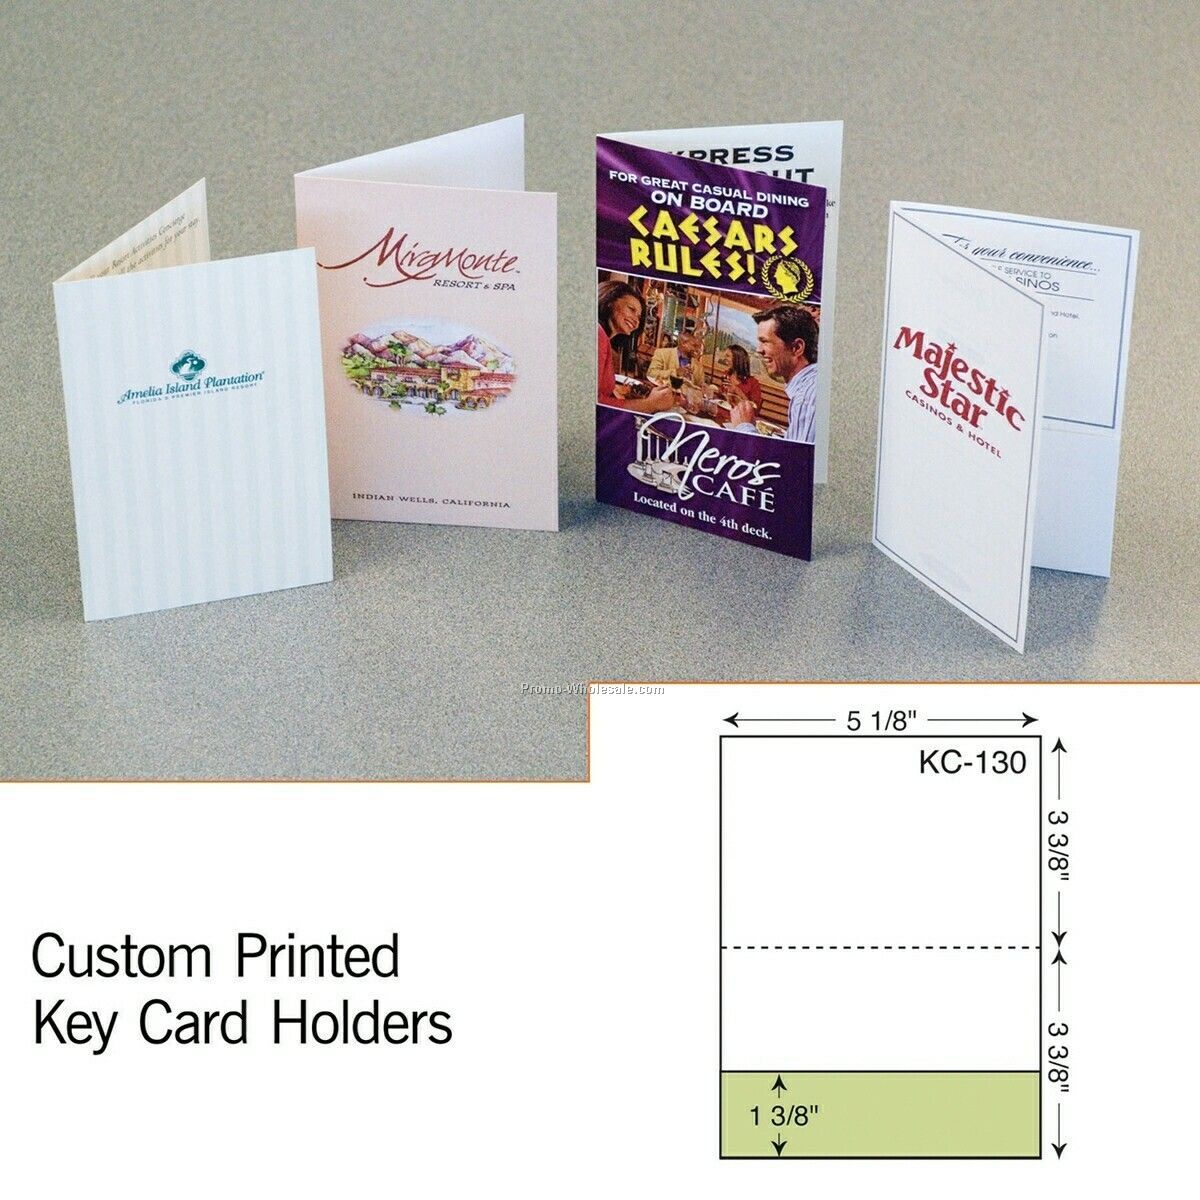 2-3/4"x4-1/2" Key Card W/ Curved Right Pocket (1 Color)